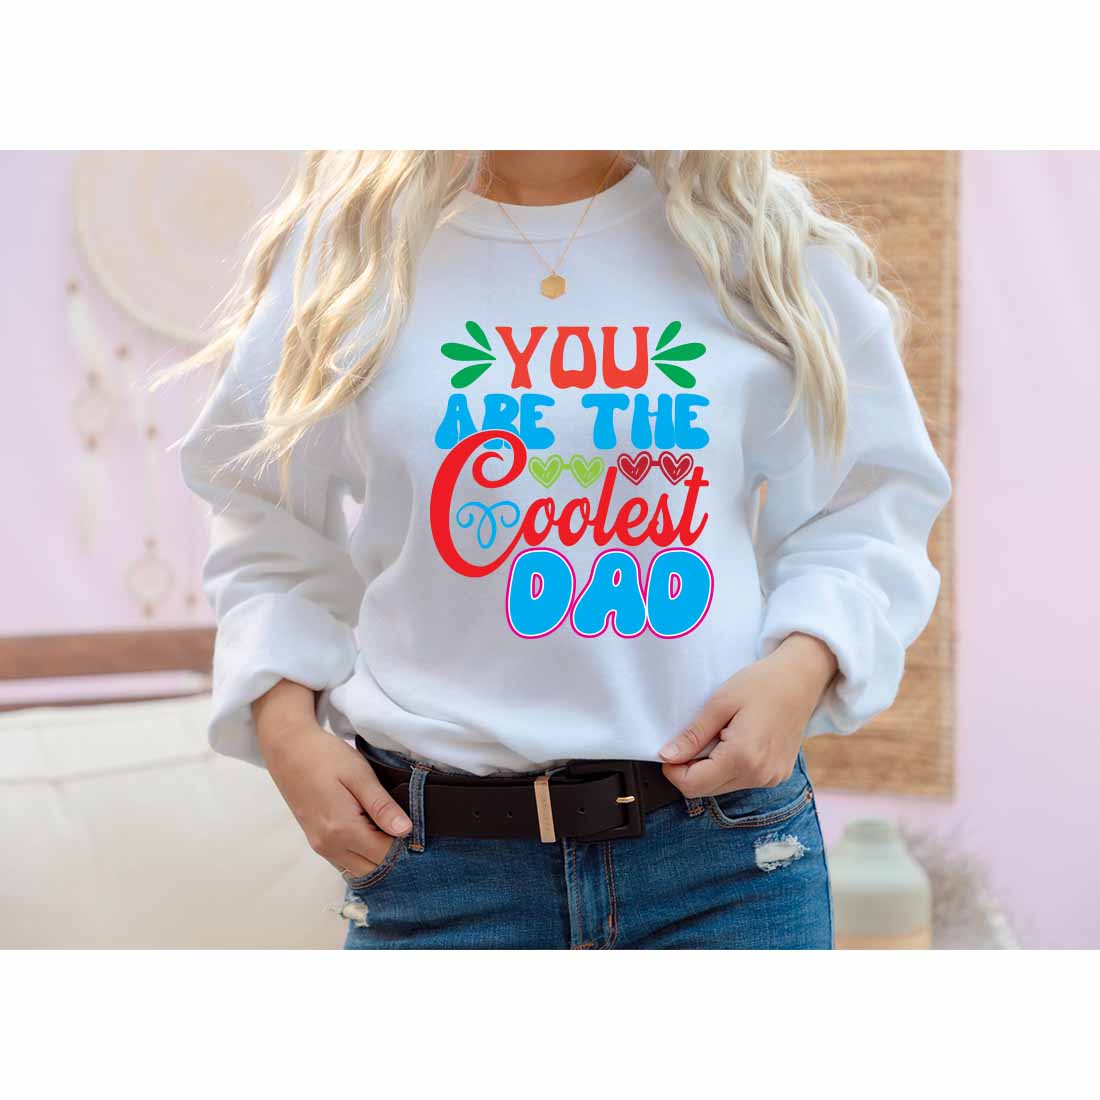 You are the the coolest dad Retro t-shirt Designs cover image.